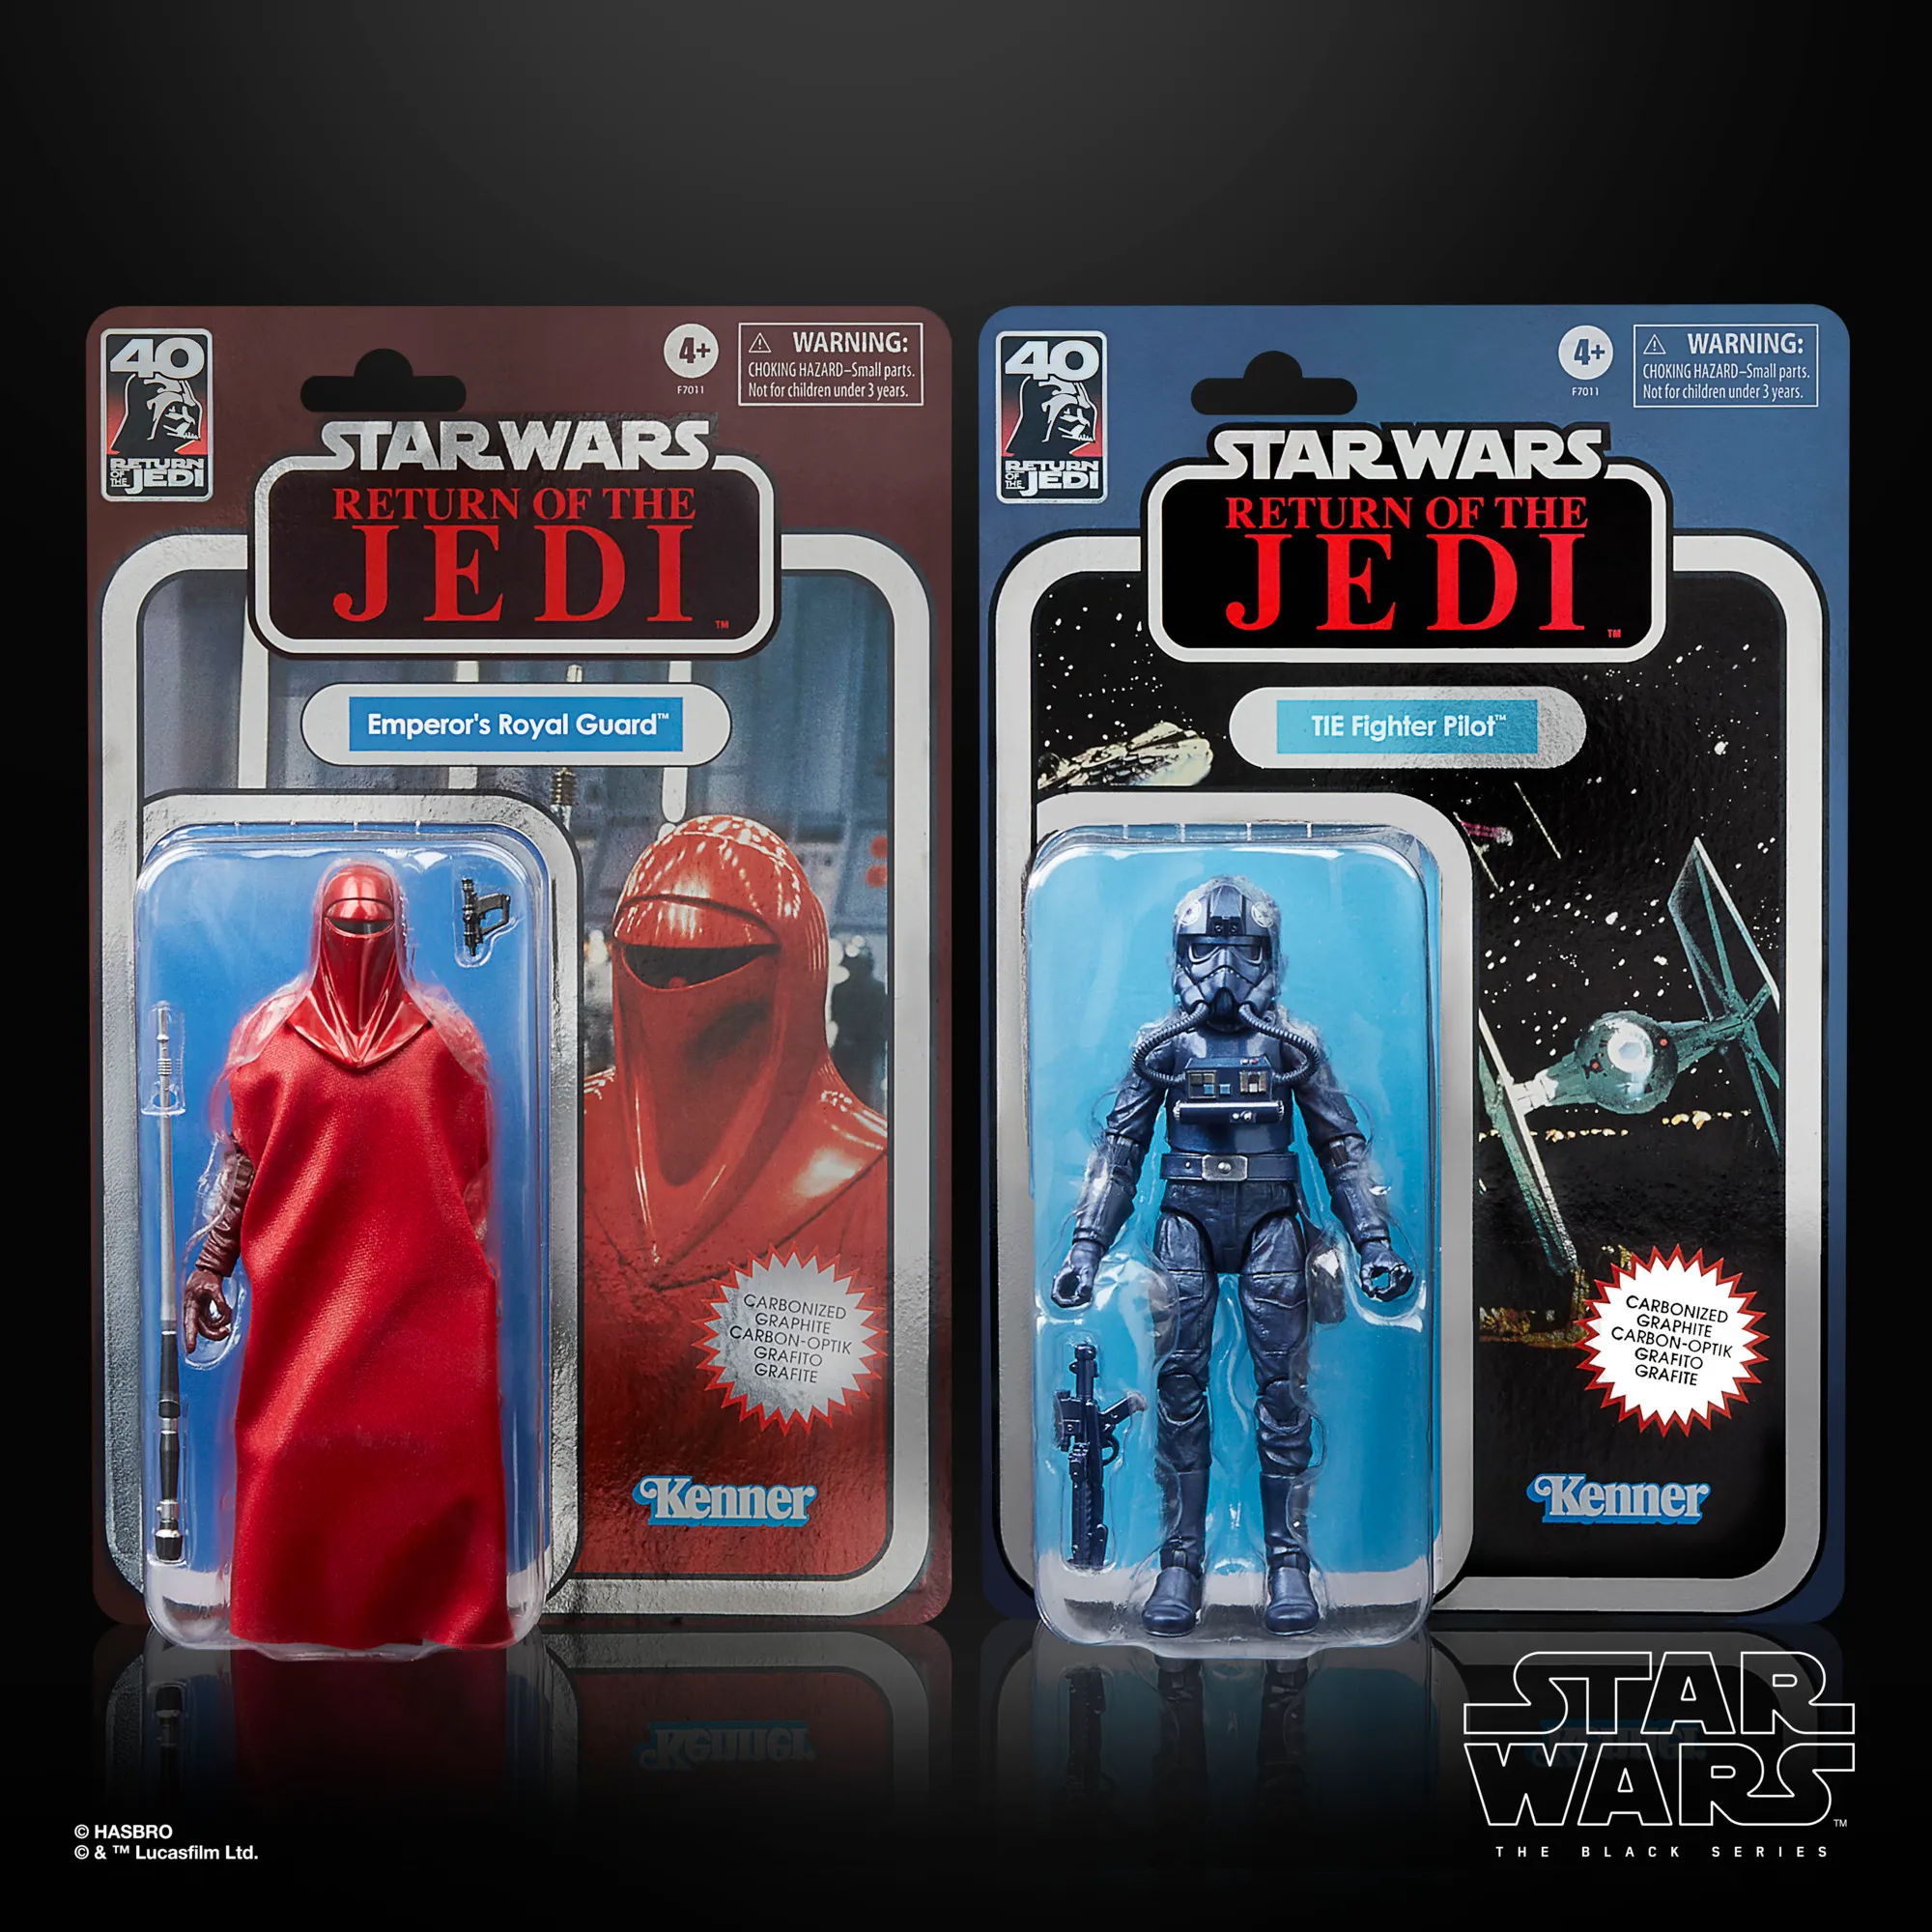 Hasbro tests Star Wars price limits again with $70 2-pack